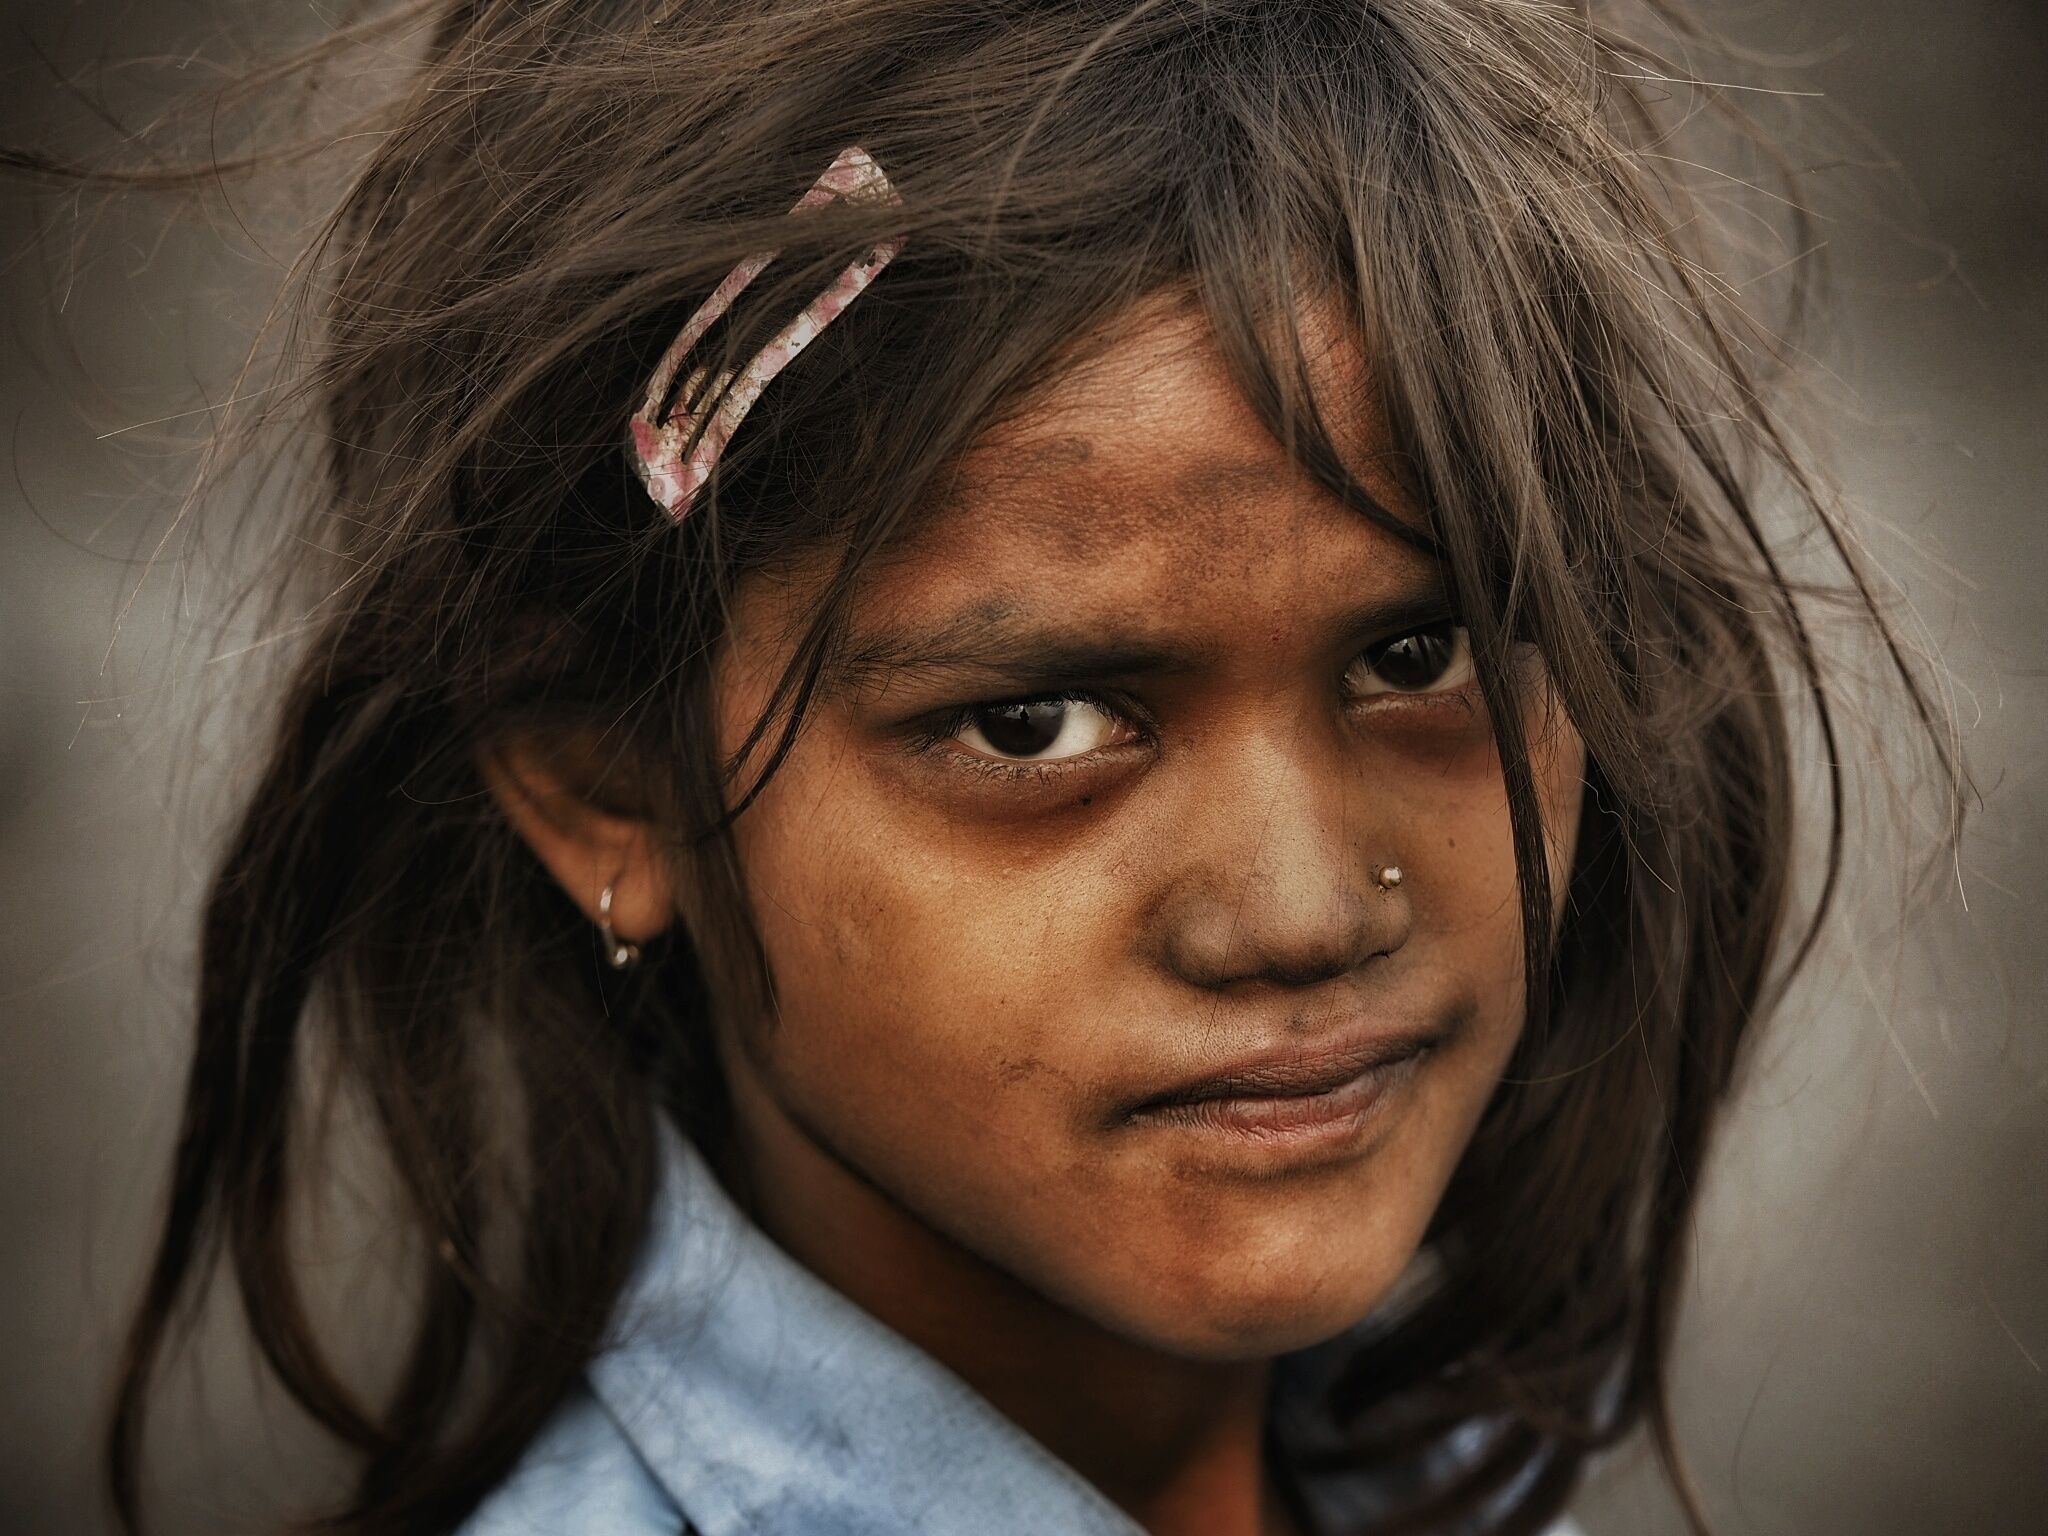 A young girl scavenges coal at the Alkusha mine.